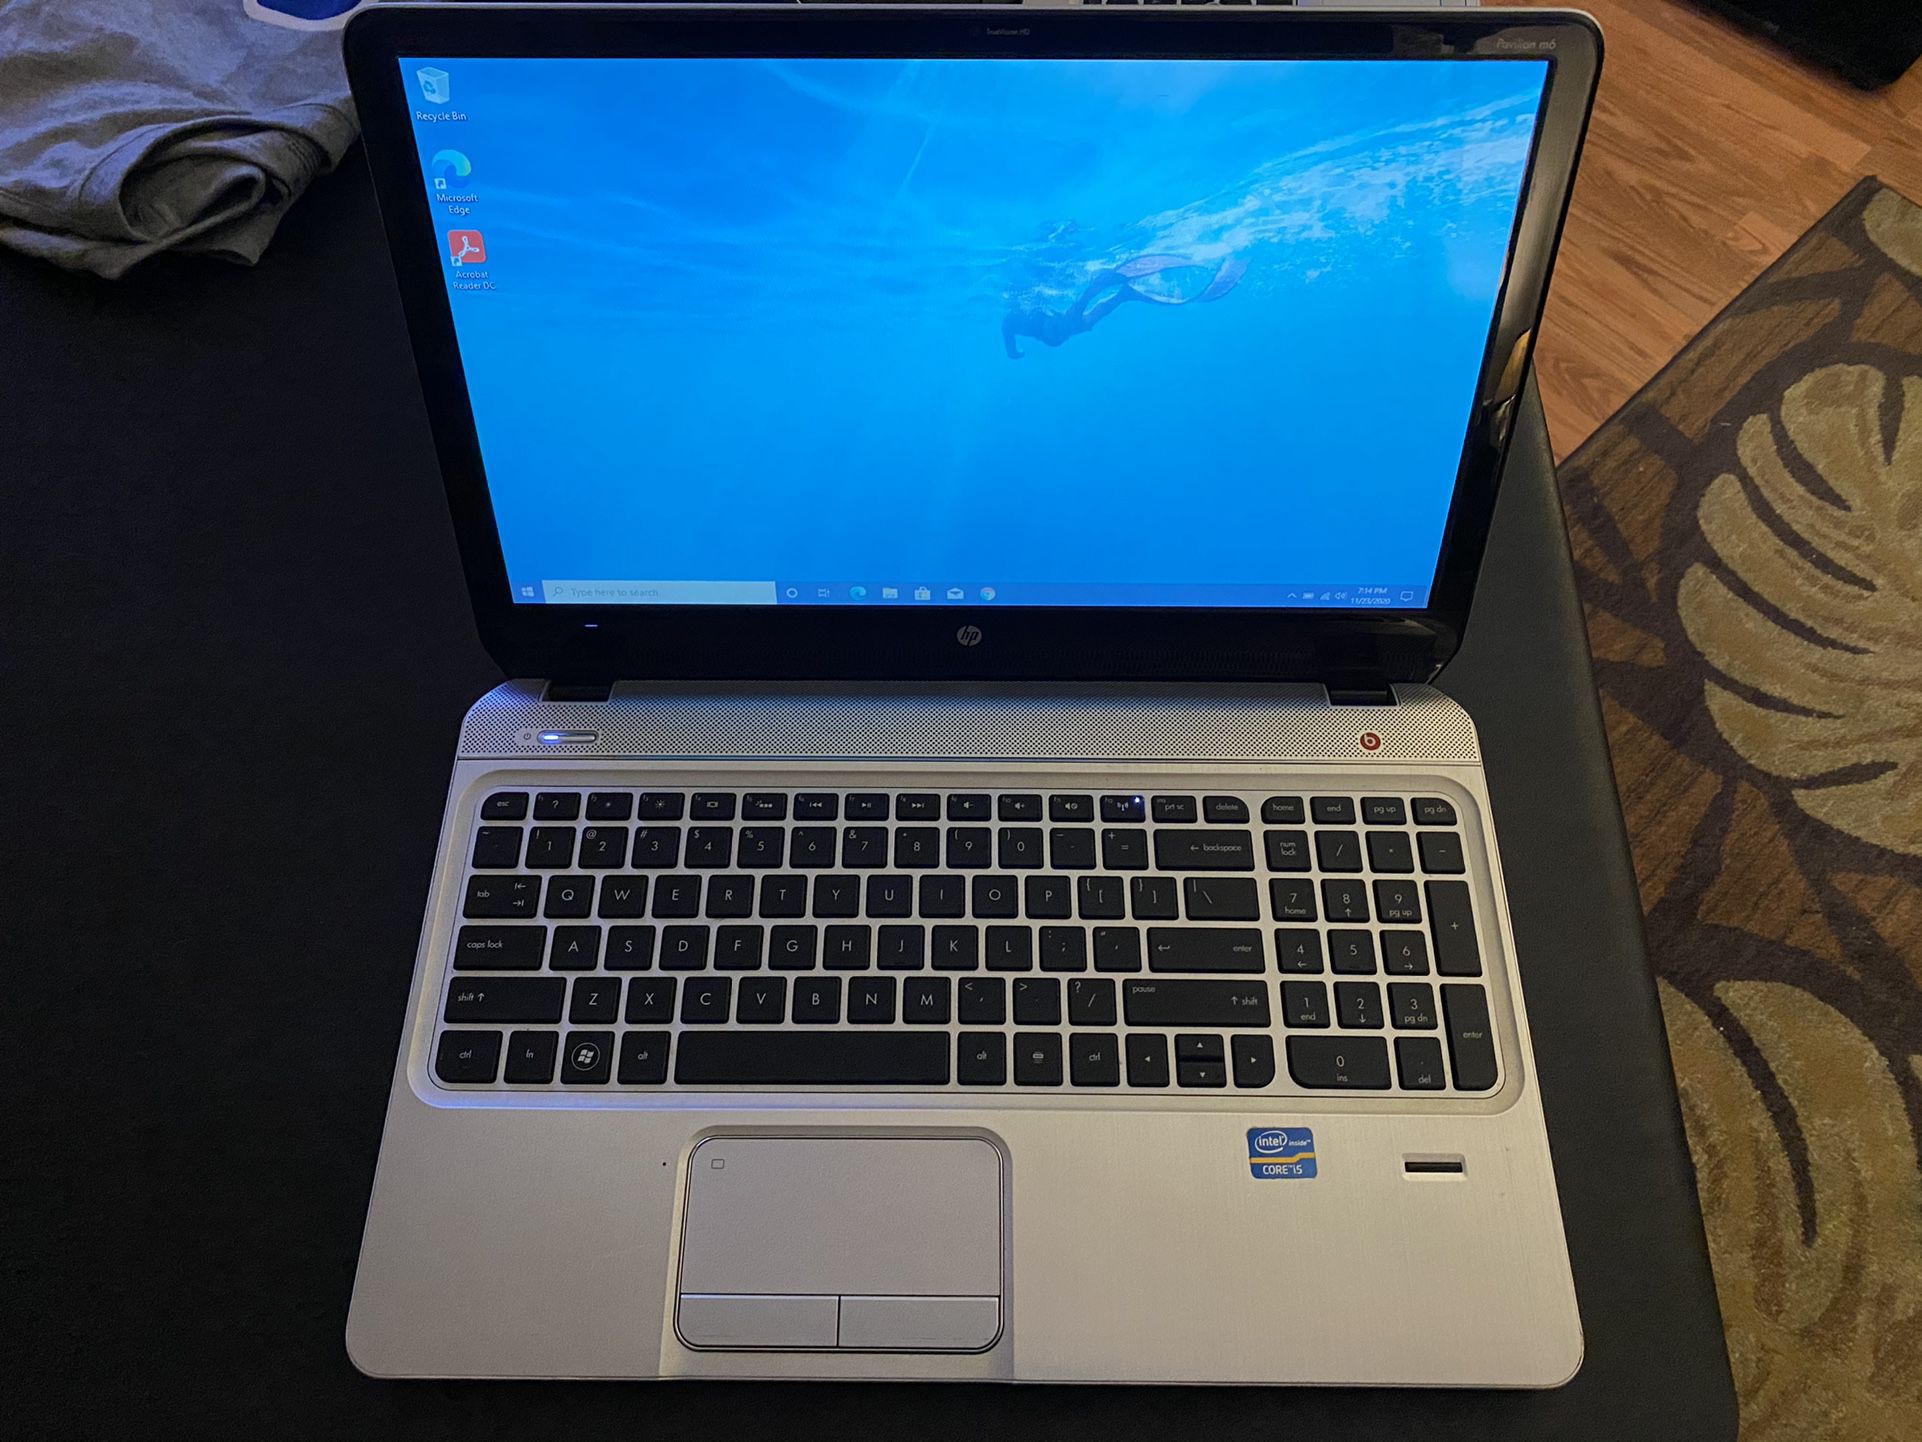 HP Pavilion M6 - Trades Only!